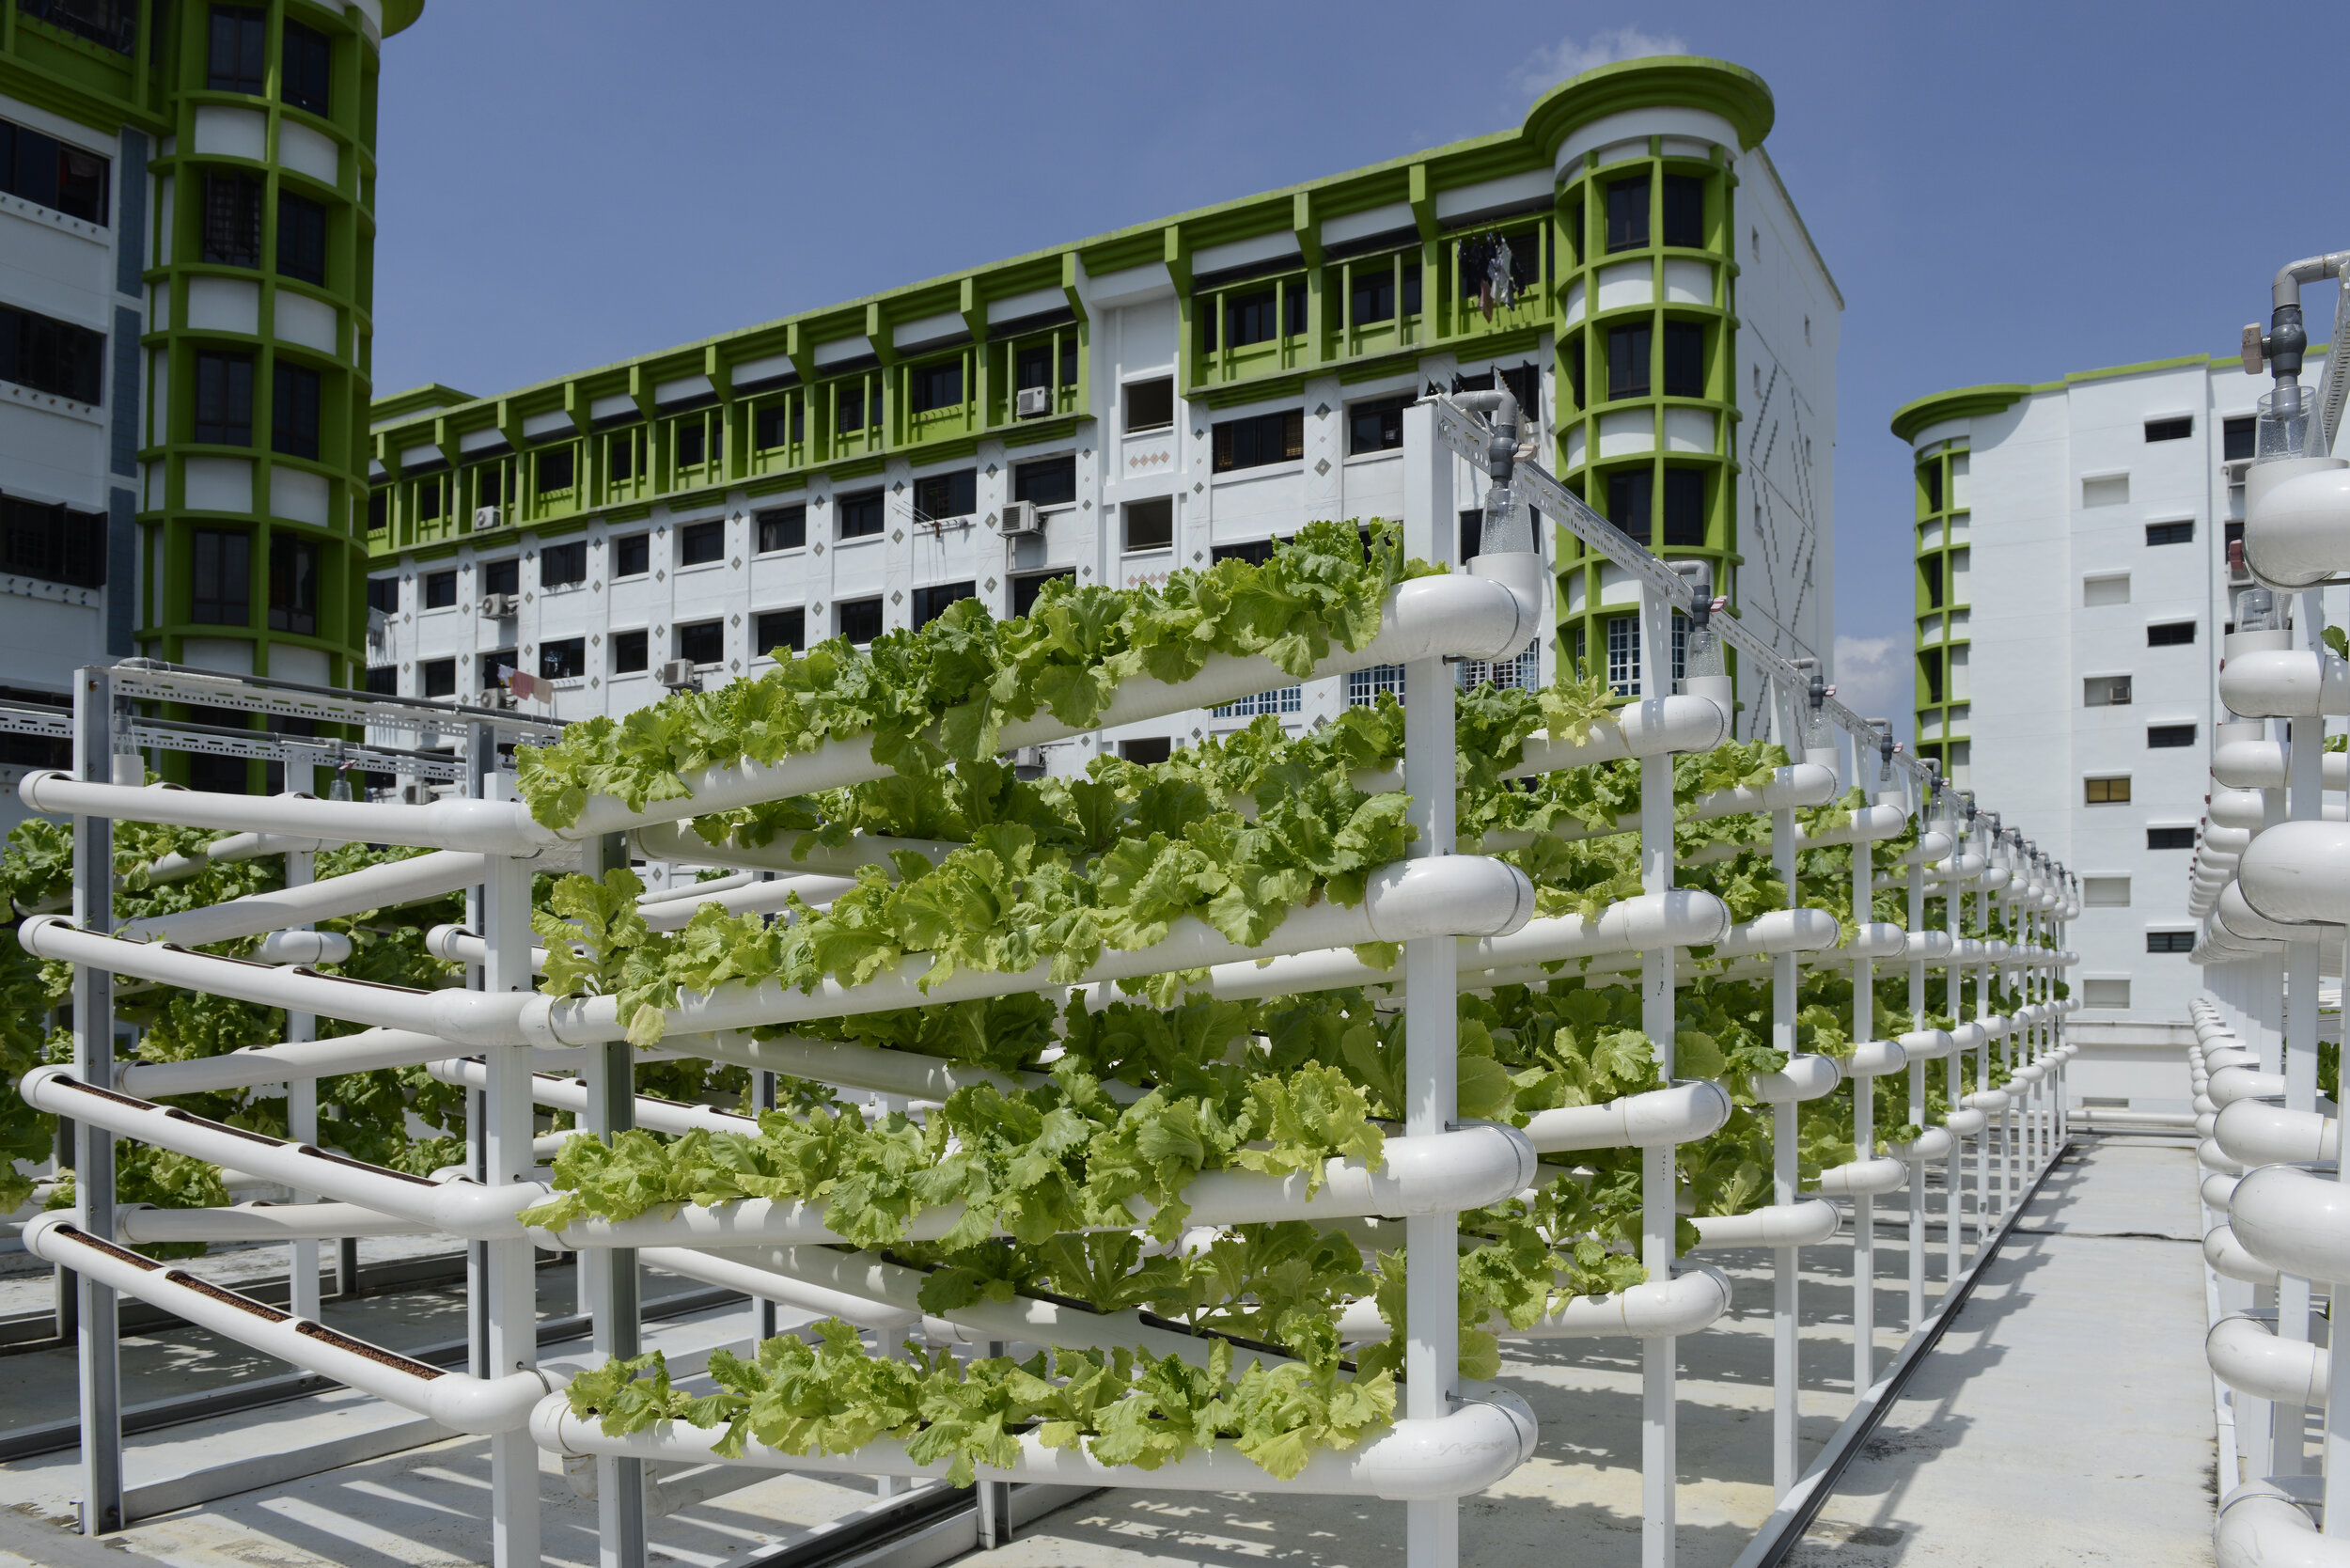  Organic vegetables are seen on growing towers that are primarily made out of polyvinyl chloride (PVC) pipes at Citiponics' urban farm on the rooftop of a multi-storey carpark in a public housing estate in western Singapore 